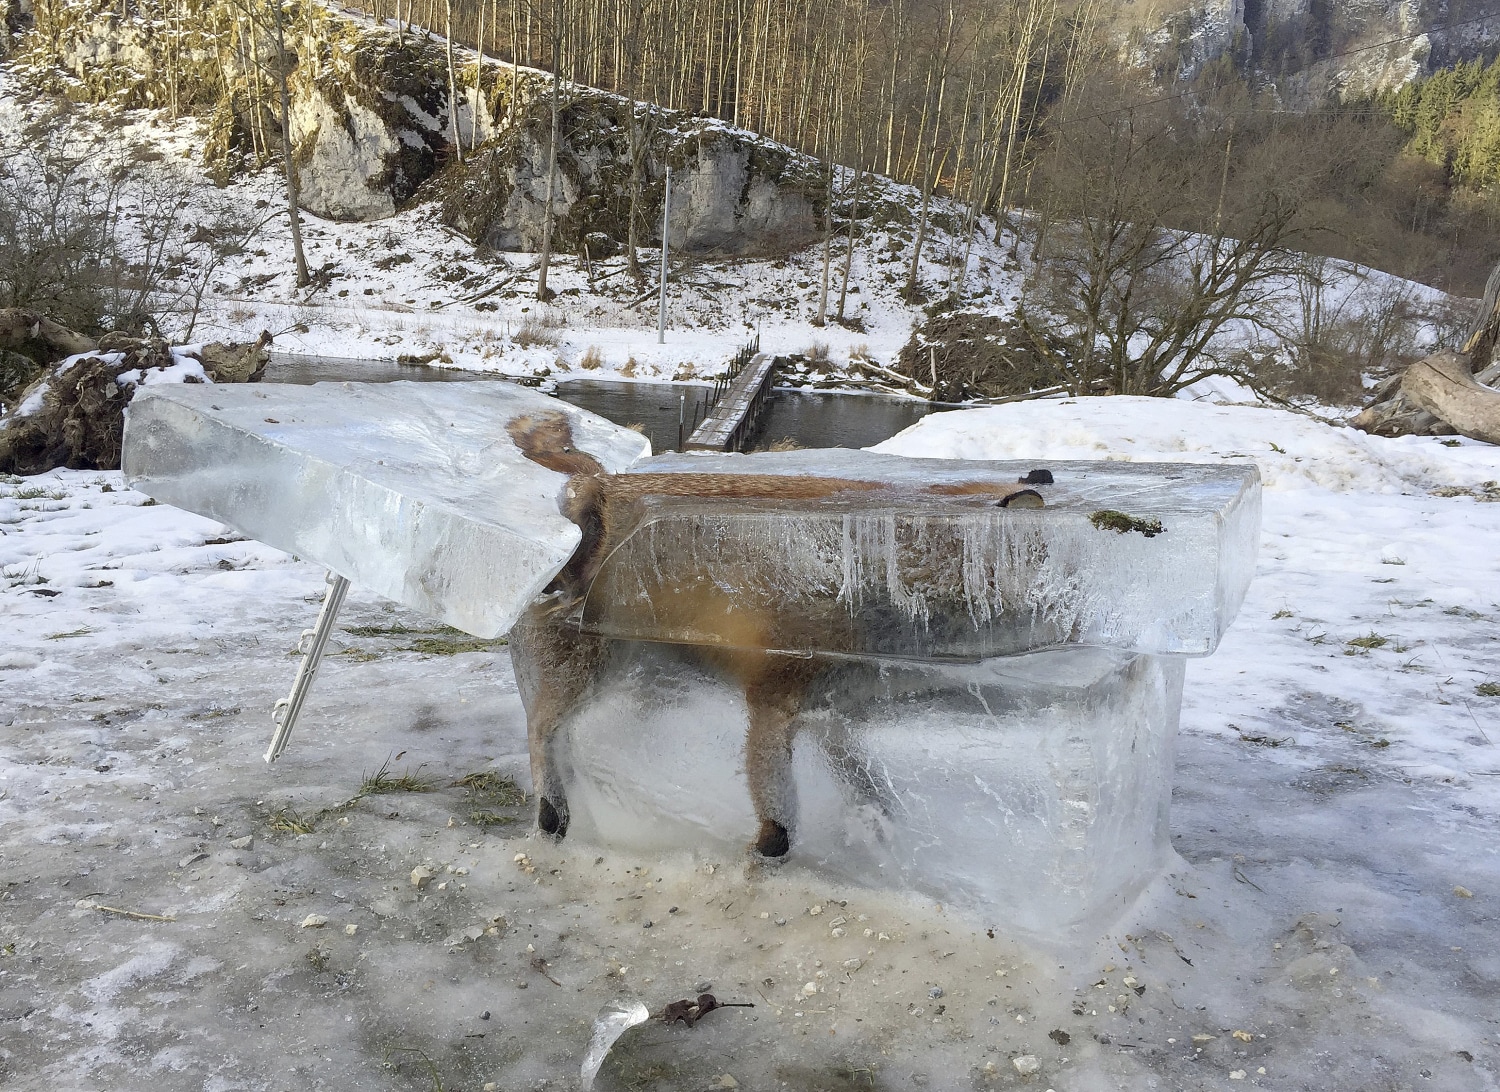 Should You Put Ice in a Deer? 